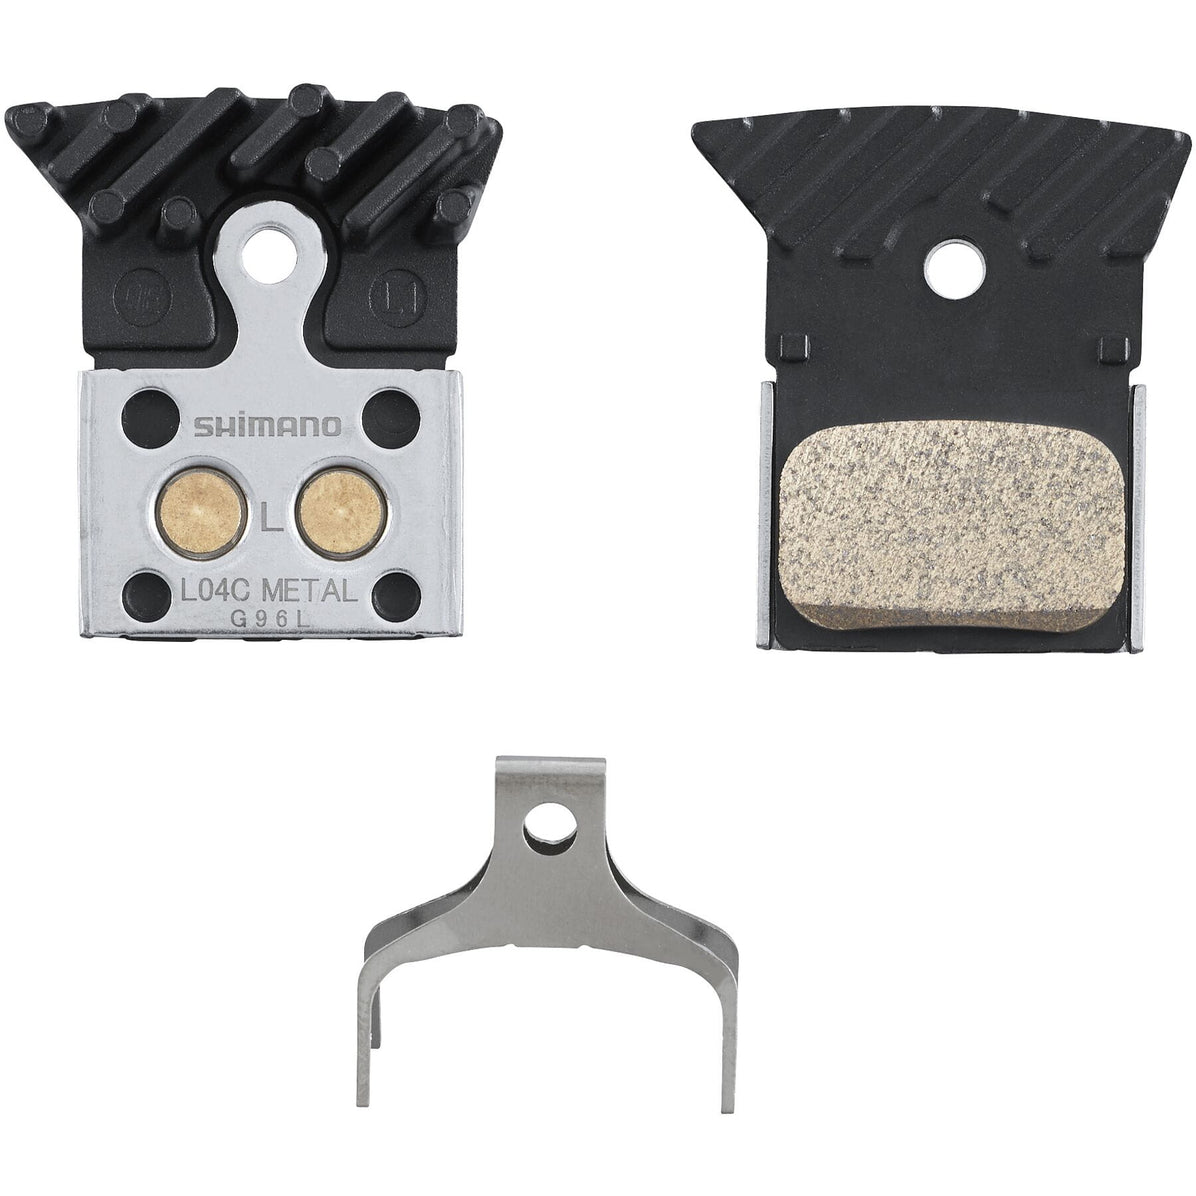 Shimano XT L04C Metal Sintered Disc Brake Pads with Cooling Fins